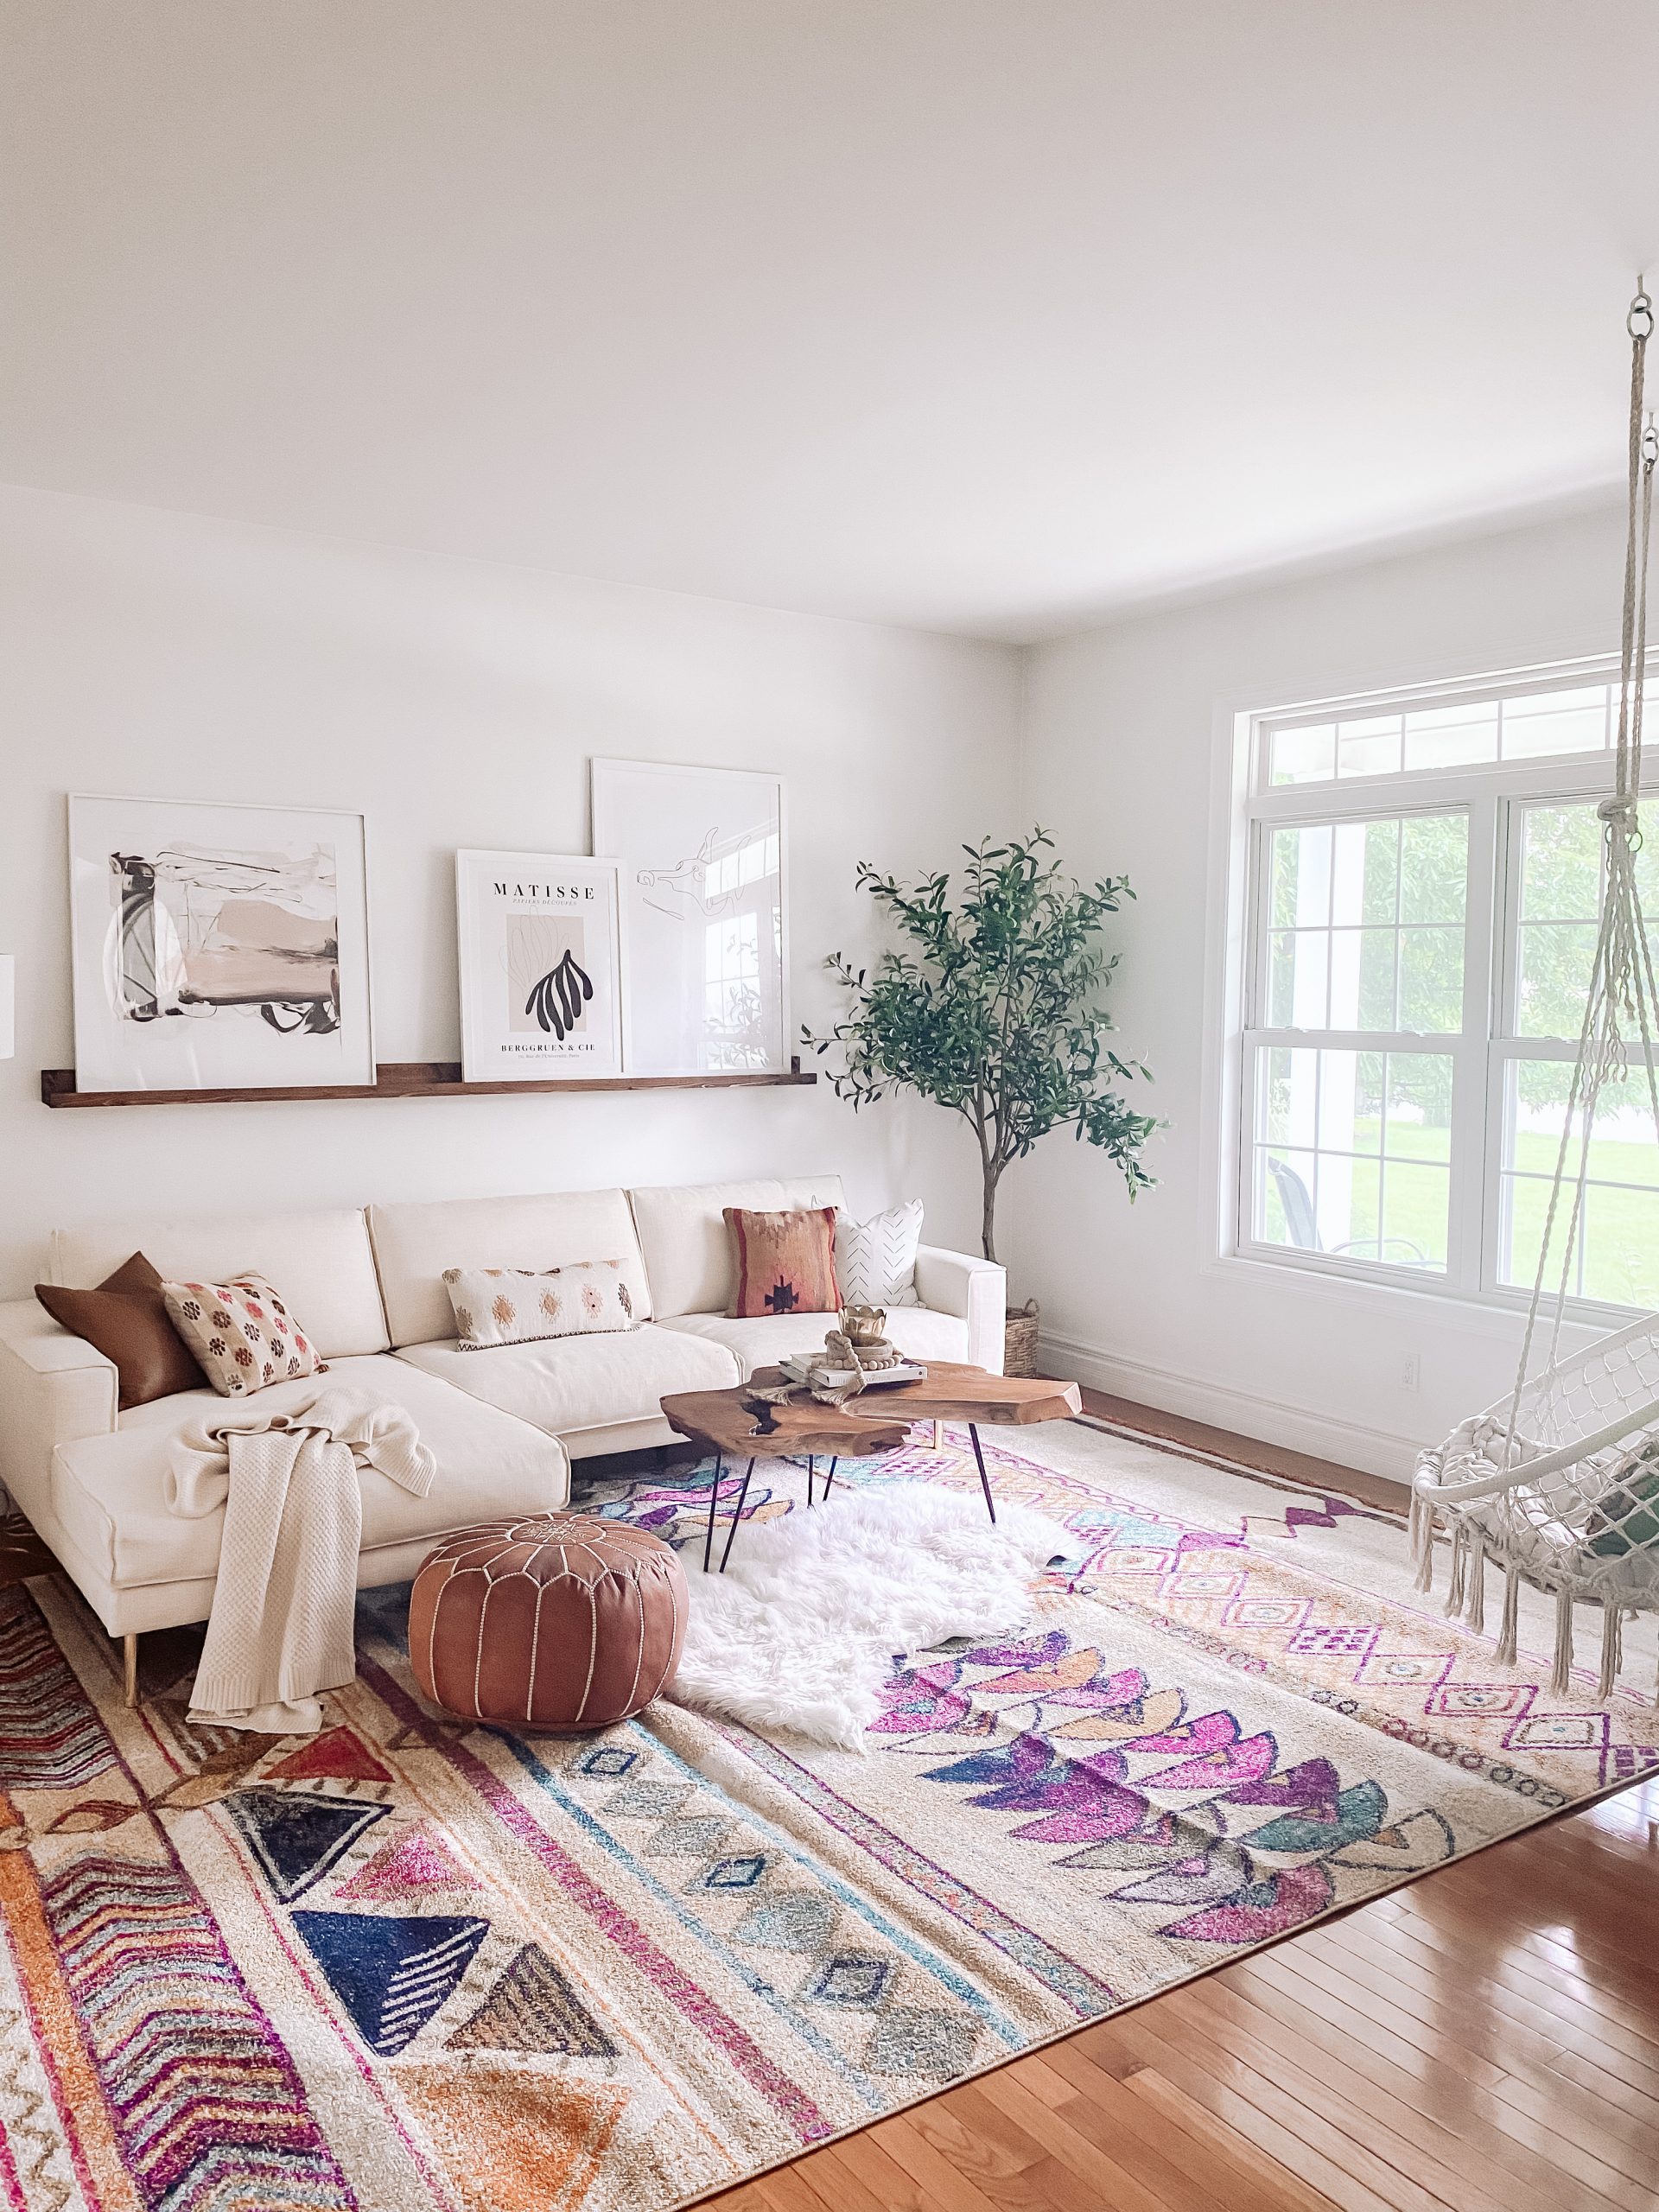 Colorful Rugs: How to Decorate with Multi-Colored Area Rugs - The Roll-Out